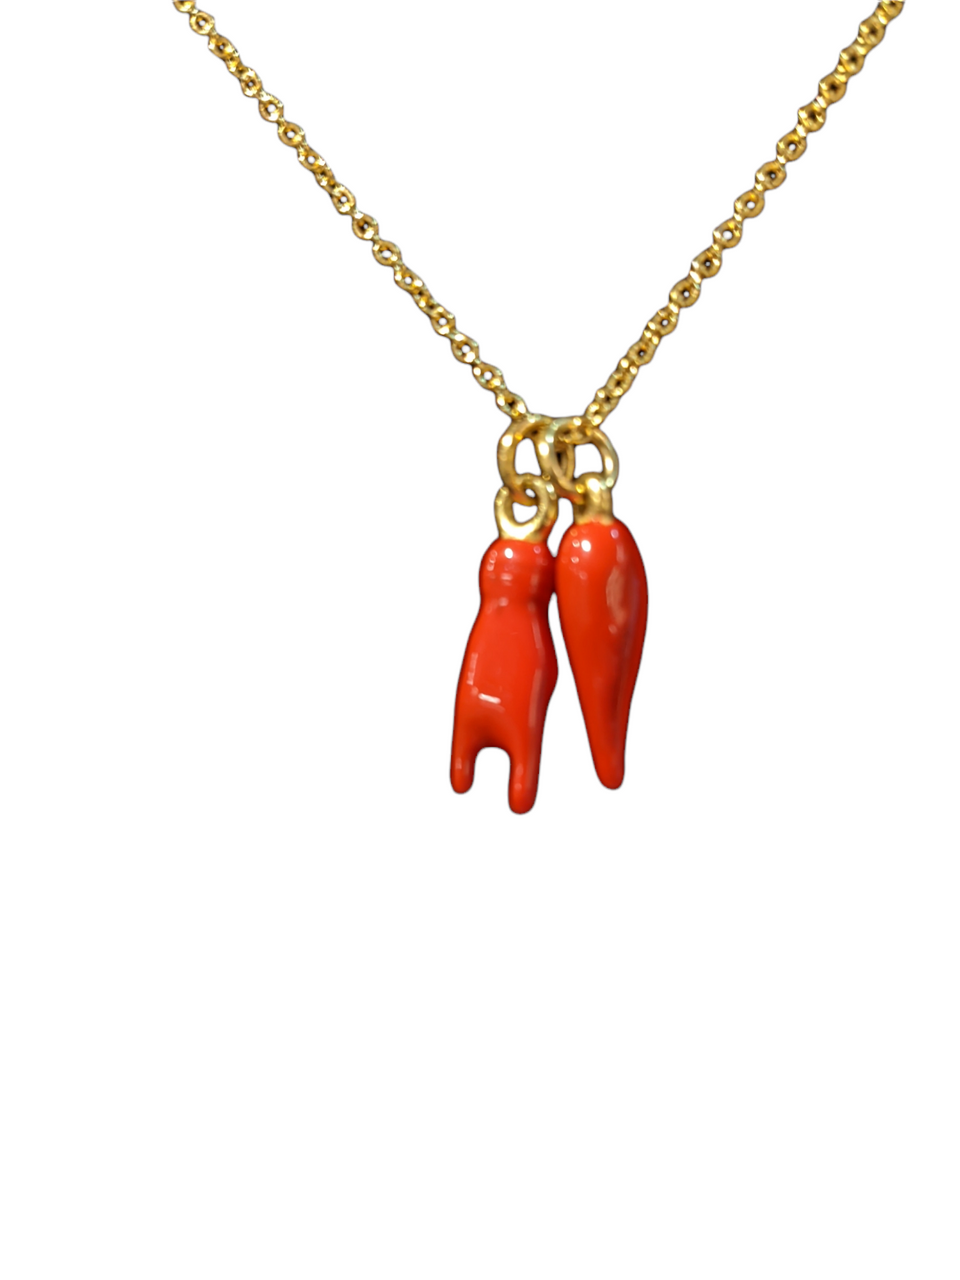 Amazon.com: fishhook Italian Horn Pendant Chili Pepper Pendant Necklace  Lucky Symbol Talisman for Bringing Good Luck Necklace for Summer Beach  Daily Wear